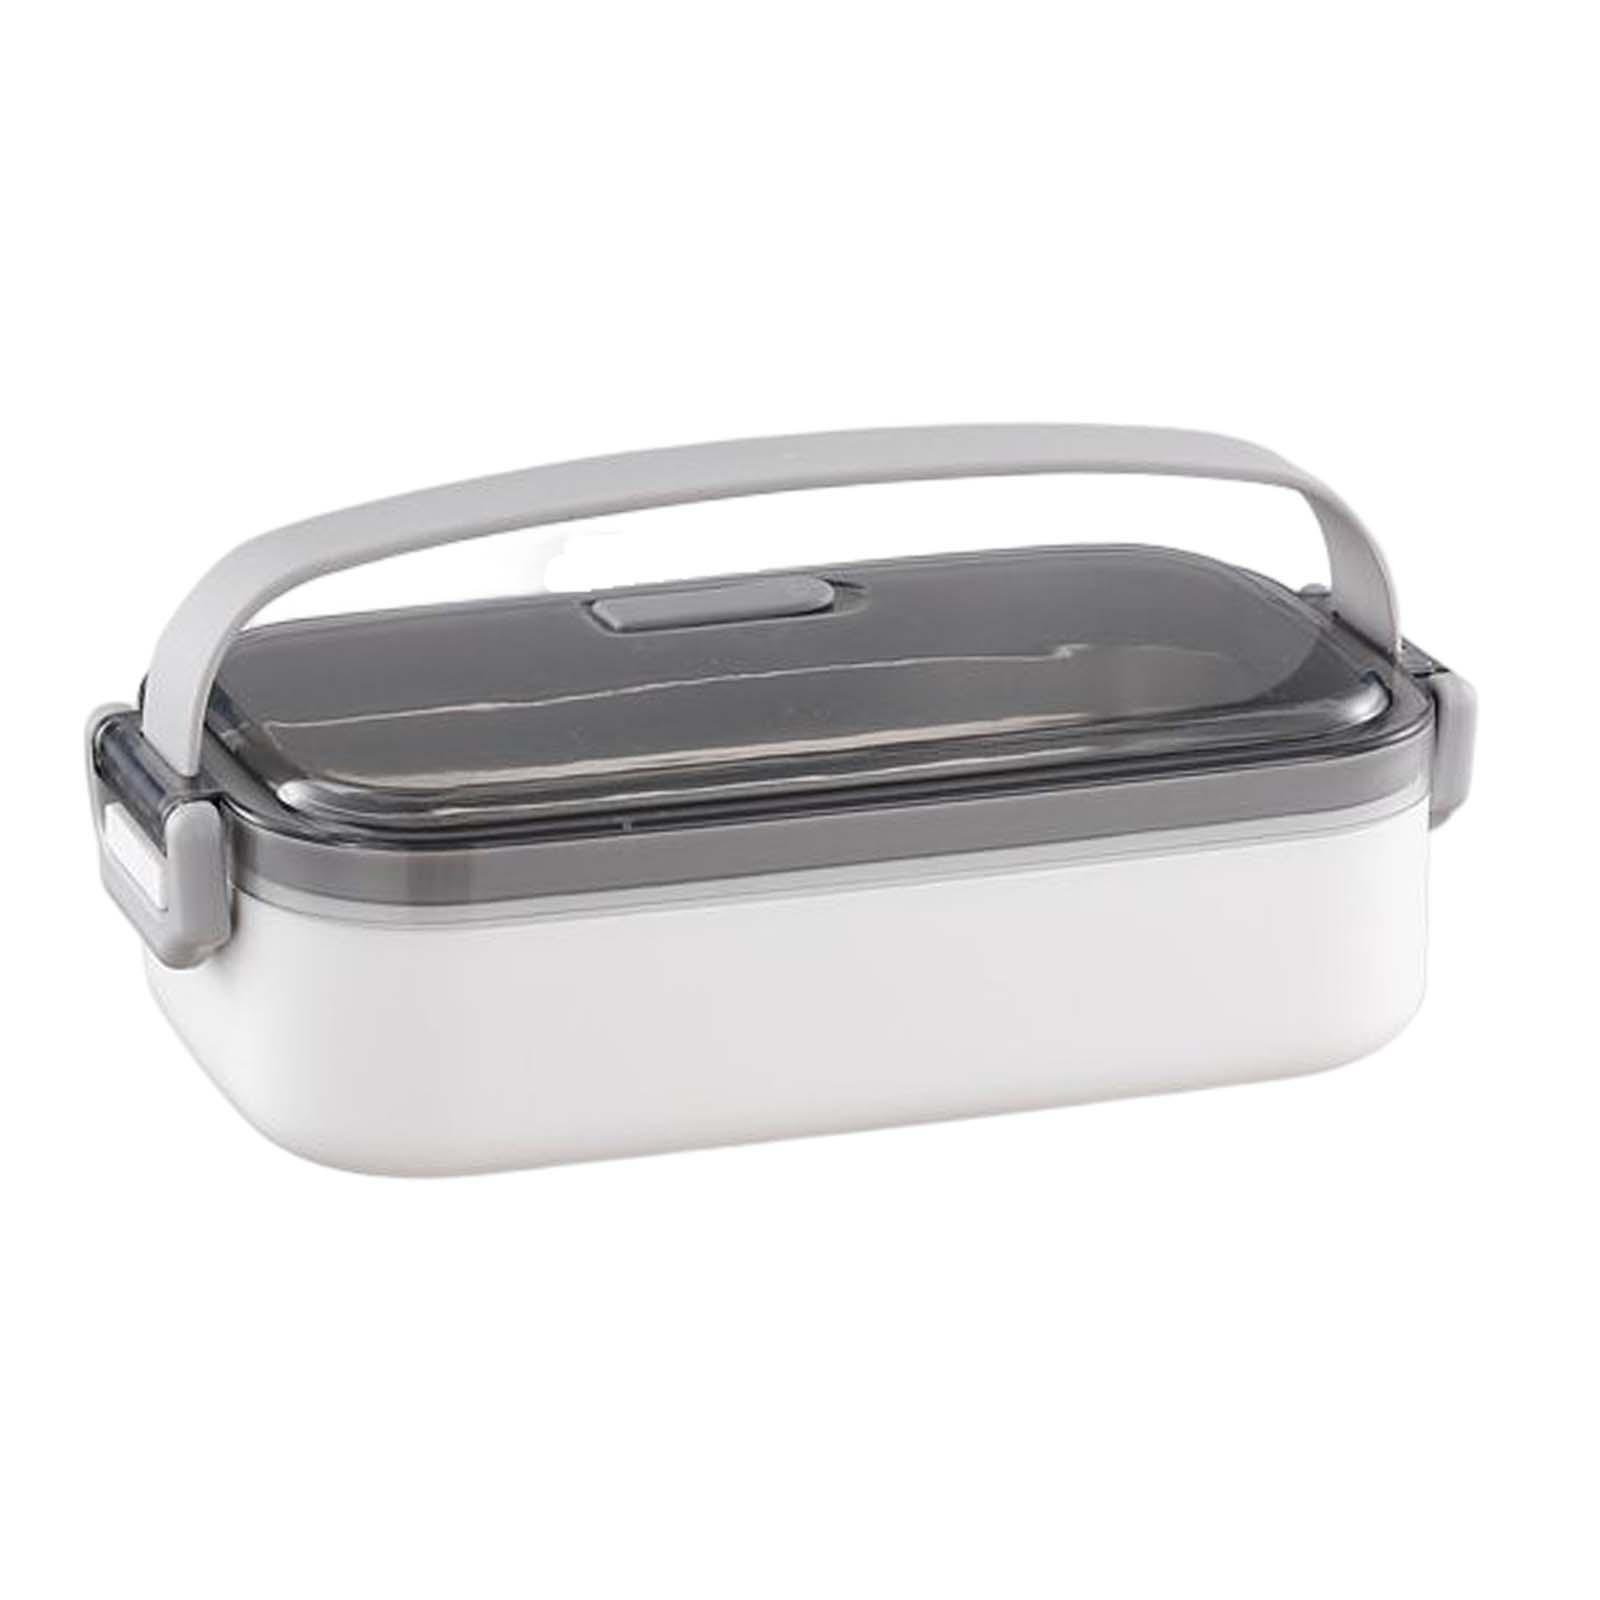 Lunch Box Large Capacity Bento Box Food Container for Office Camping Outdoor